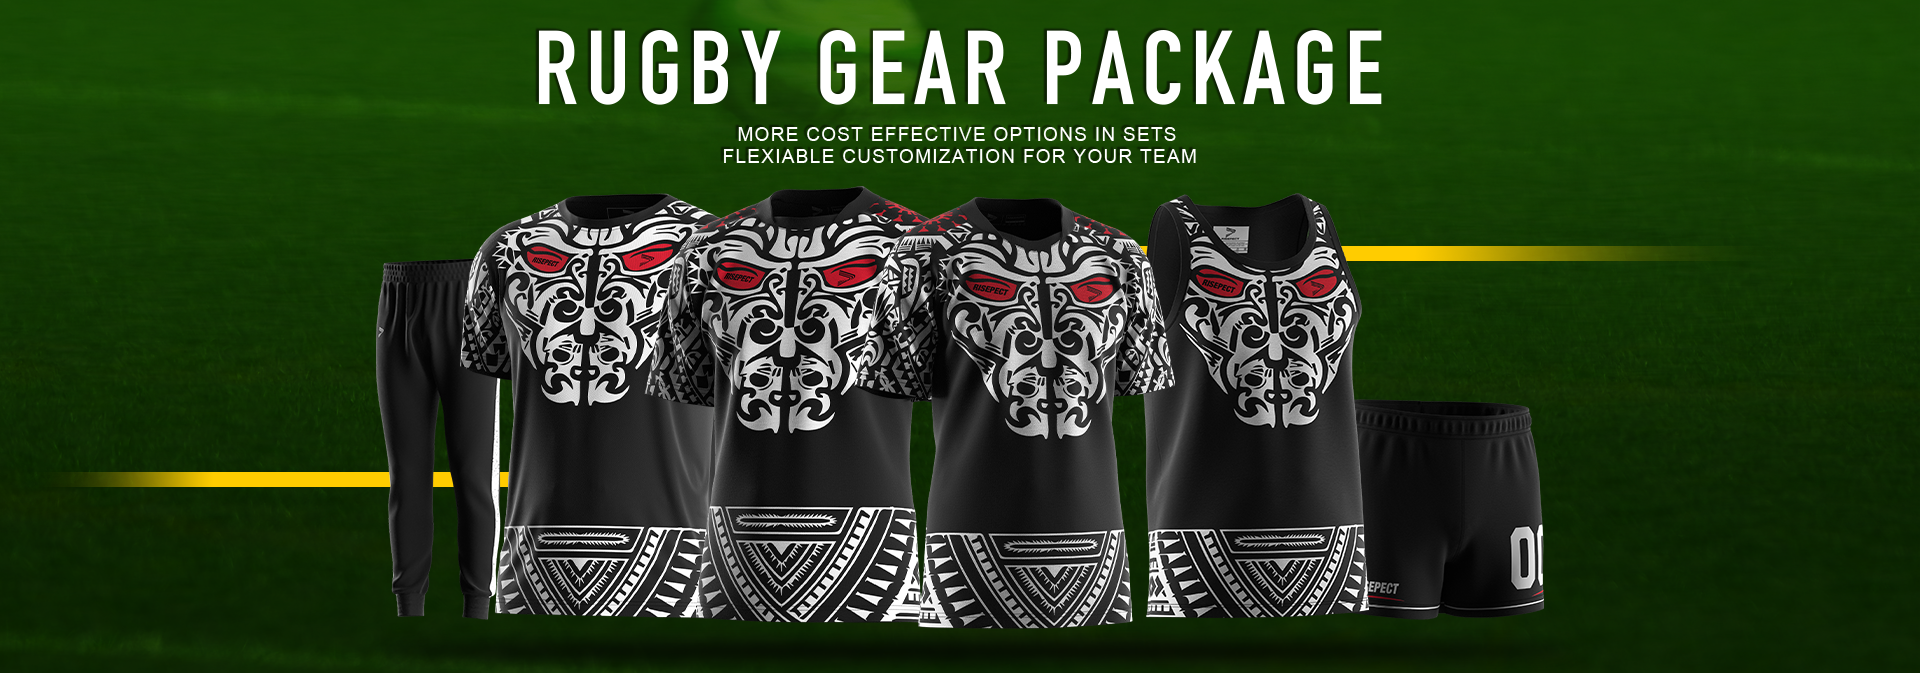 Rugby Gear Package